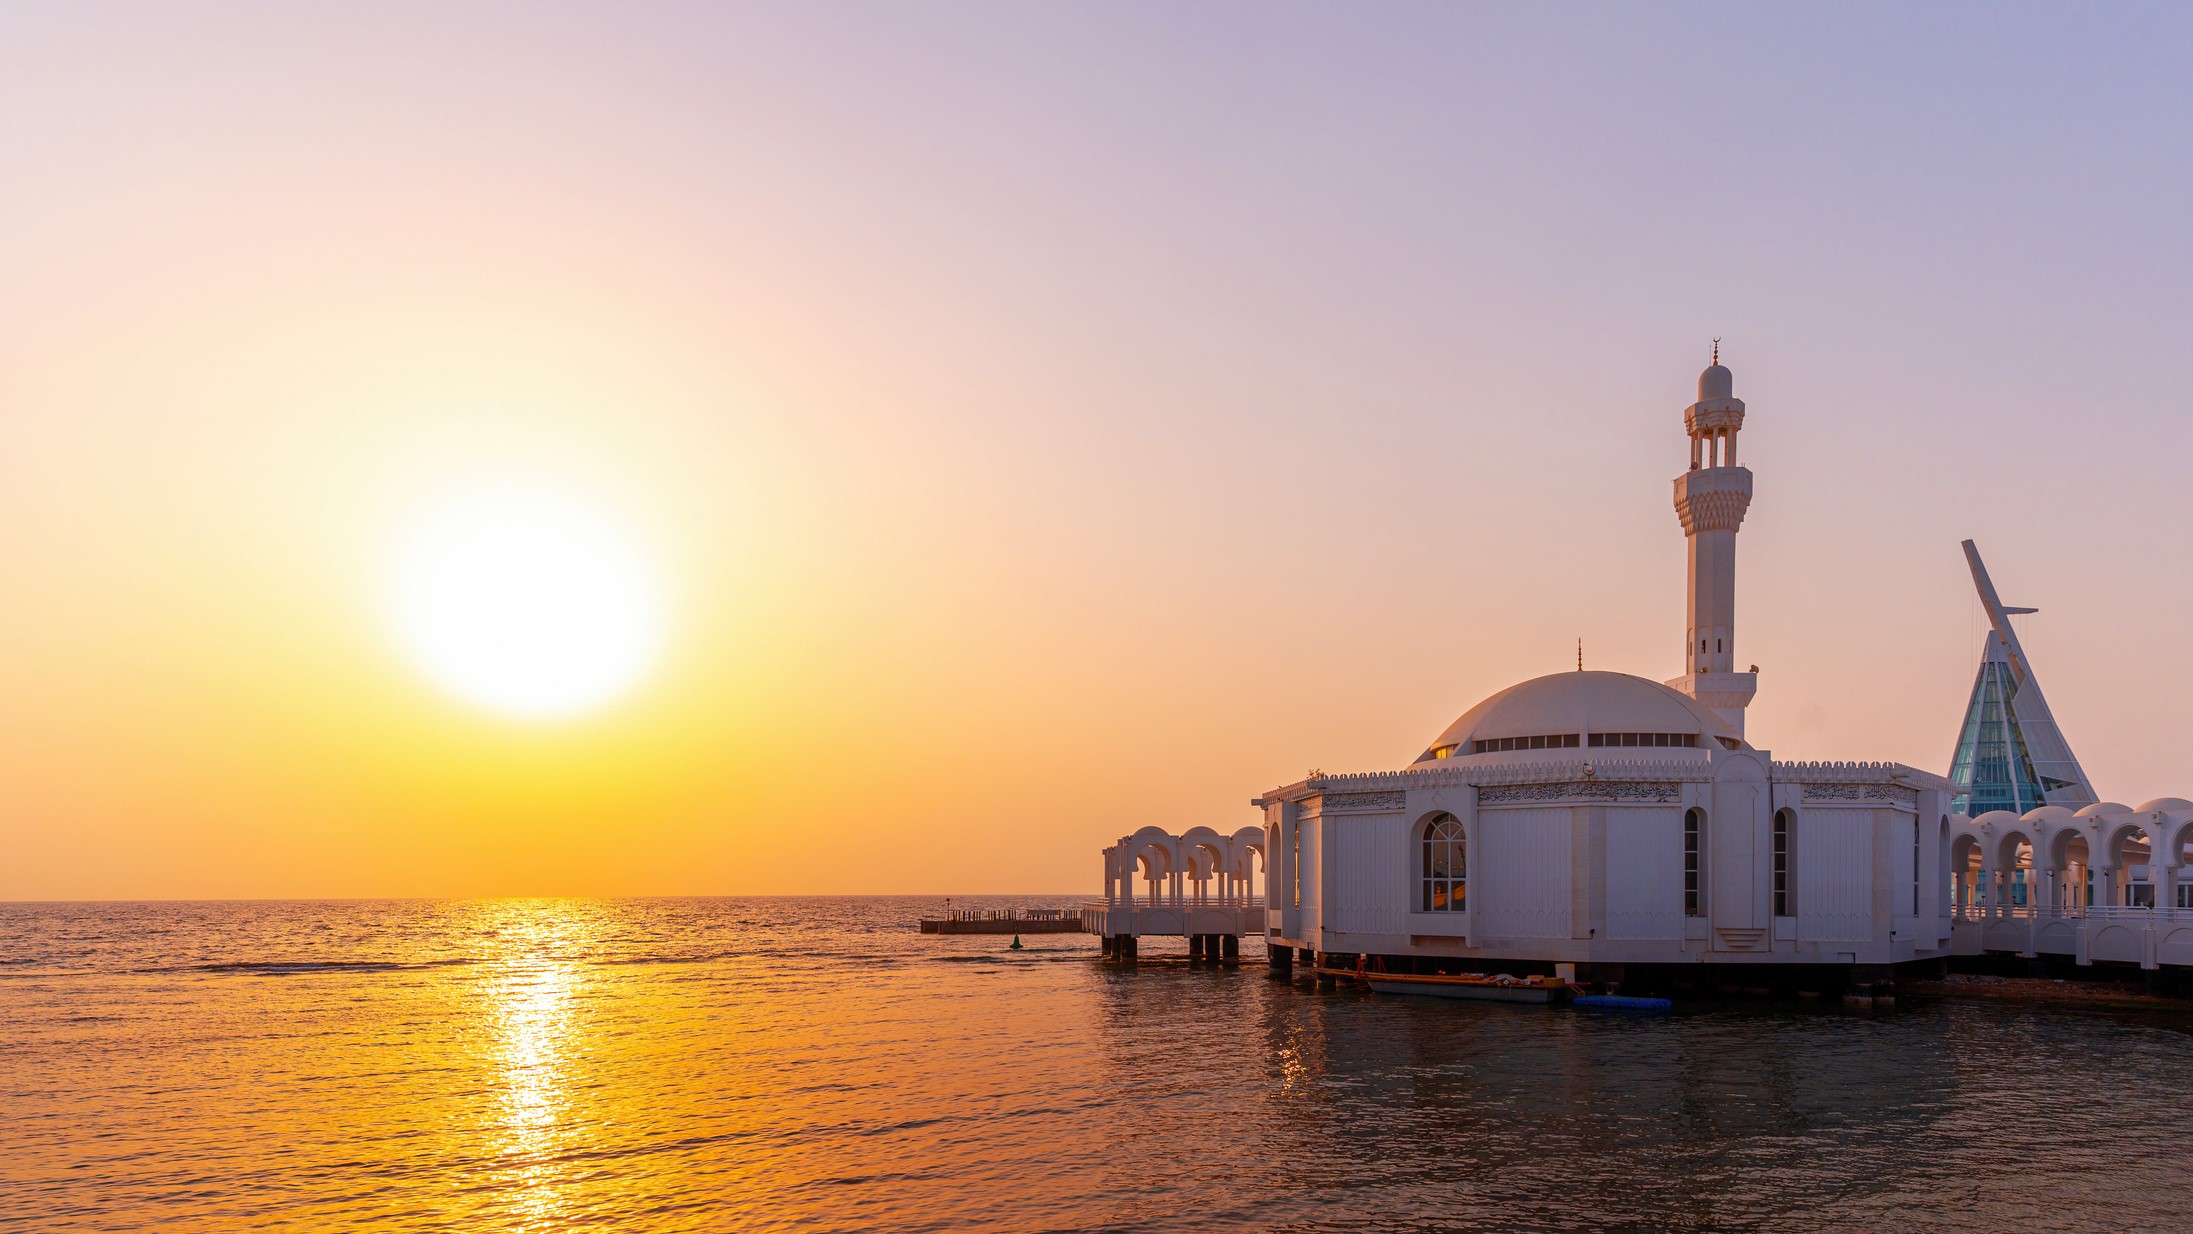 The Al-Rahmah mosque stands as an iconic symbol of Jeddah, Saudi Arabia. Constructed in 1985, this Floating Mosque is situated atop a water surface, with its foundations firmly planted beneath the sea's depths.